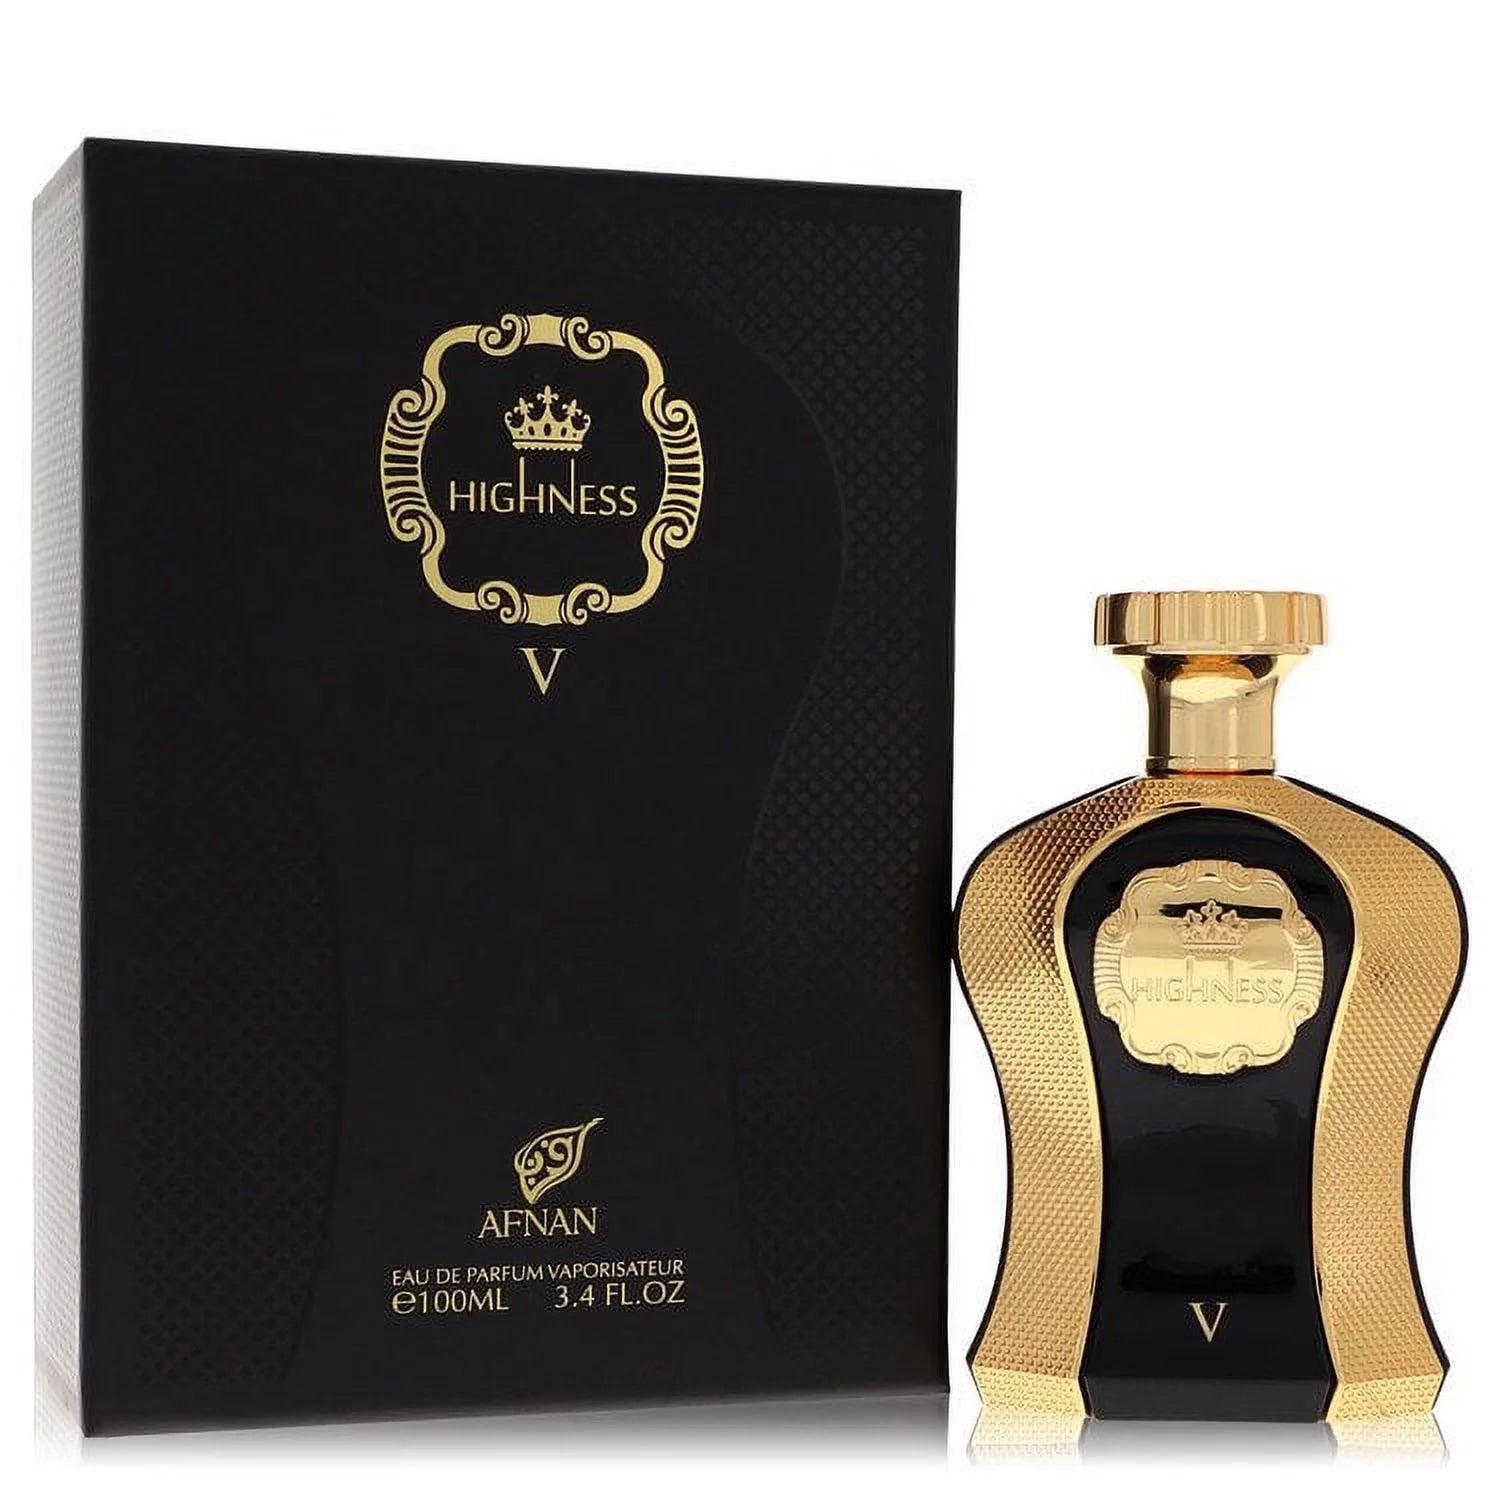 The image displays a luxurious perfume set, consisting of a black bottle with gold accents and a black packaging box. The box features the brand logo "AFNAN" and the product name "HIGHNESS" with a crown symbol above it, encircled by an ornate design with the Roman numeral "V" below.  The text "Eau de Parfum Vaporisateur" and the quantity "100ML 3.4 FL.OZ" are indicated on both the bottle and the box. The design conveys elegance and regality.